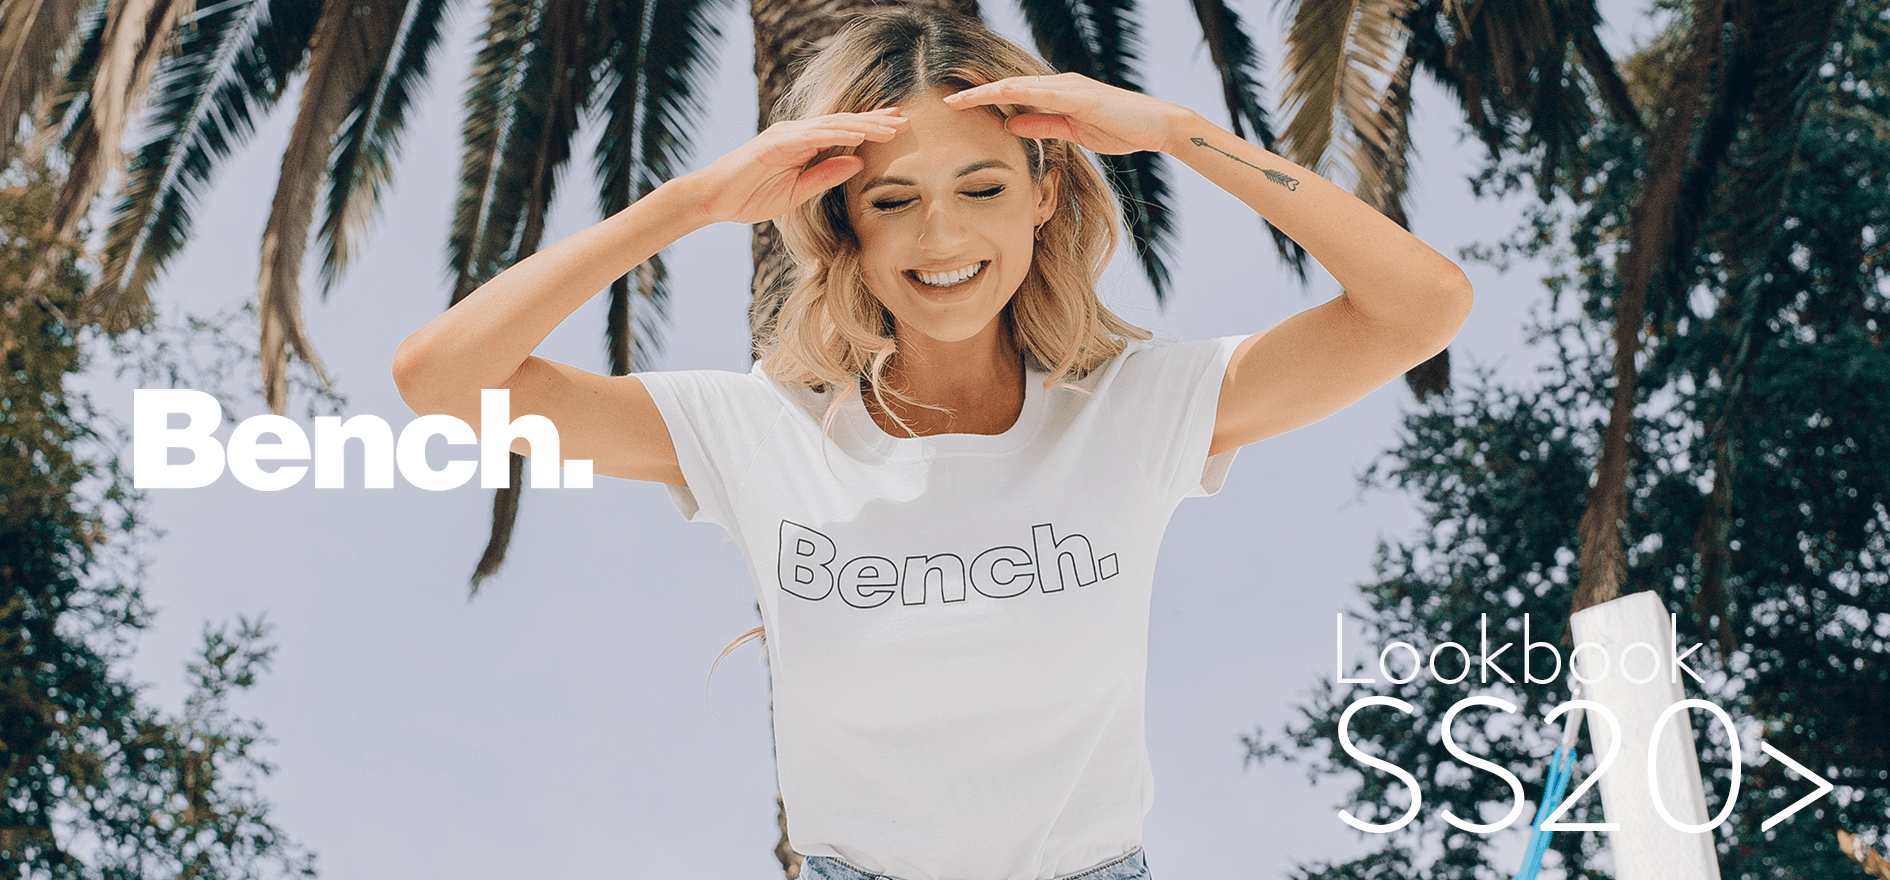 Apparel Brands acquires Bench